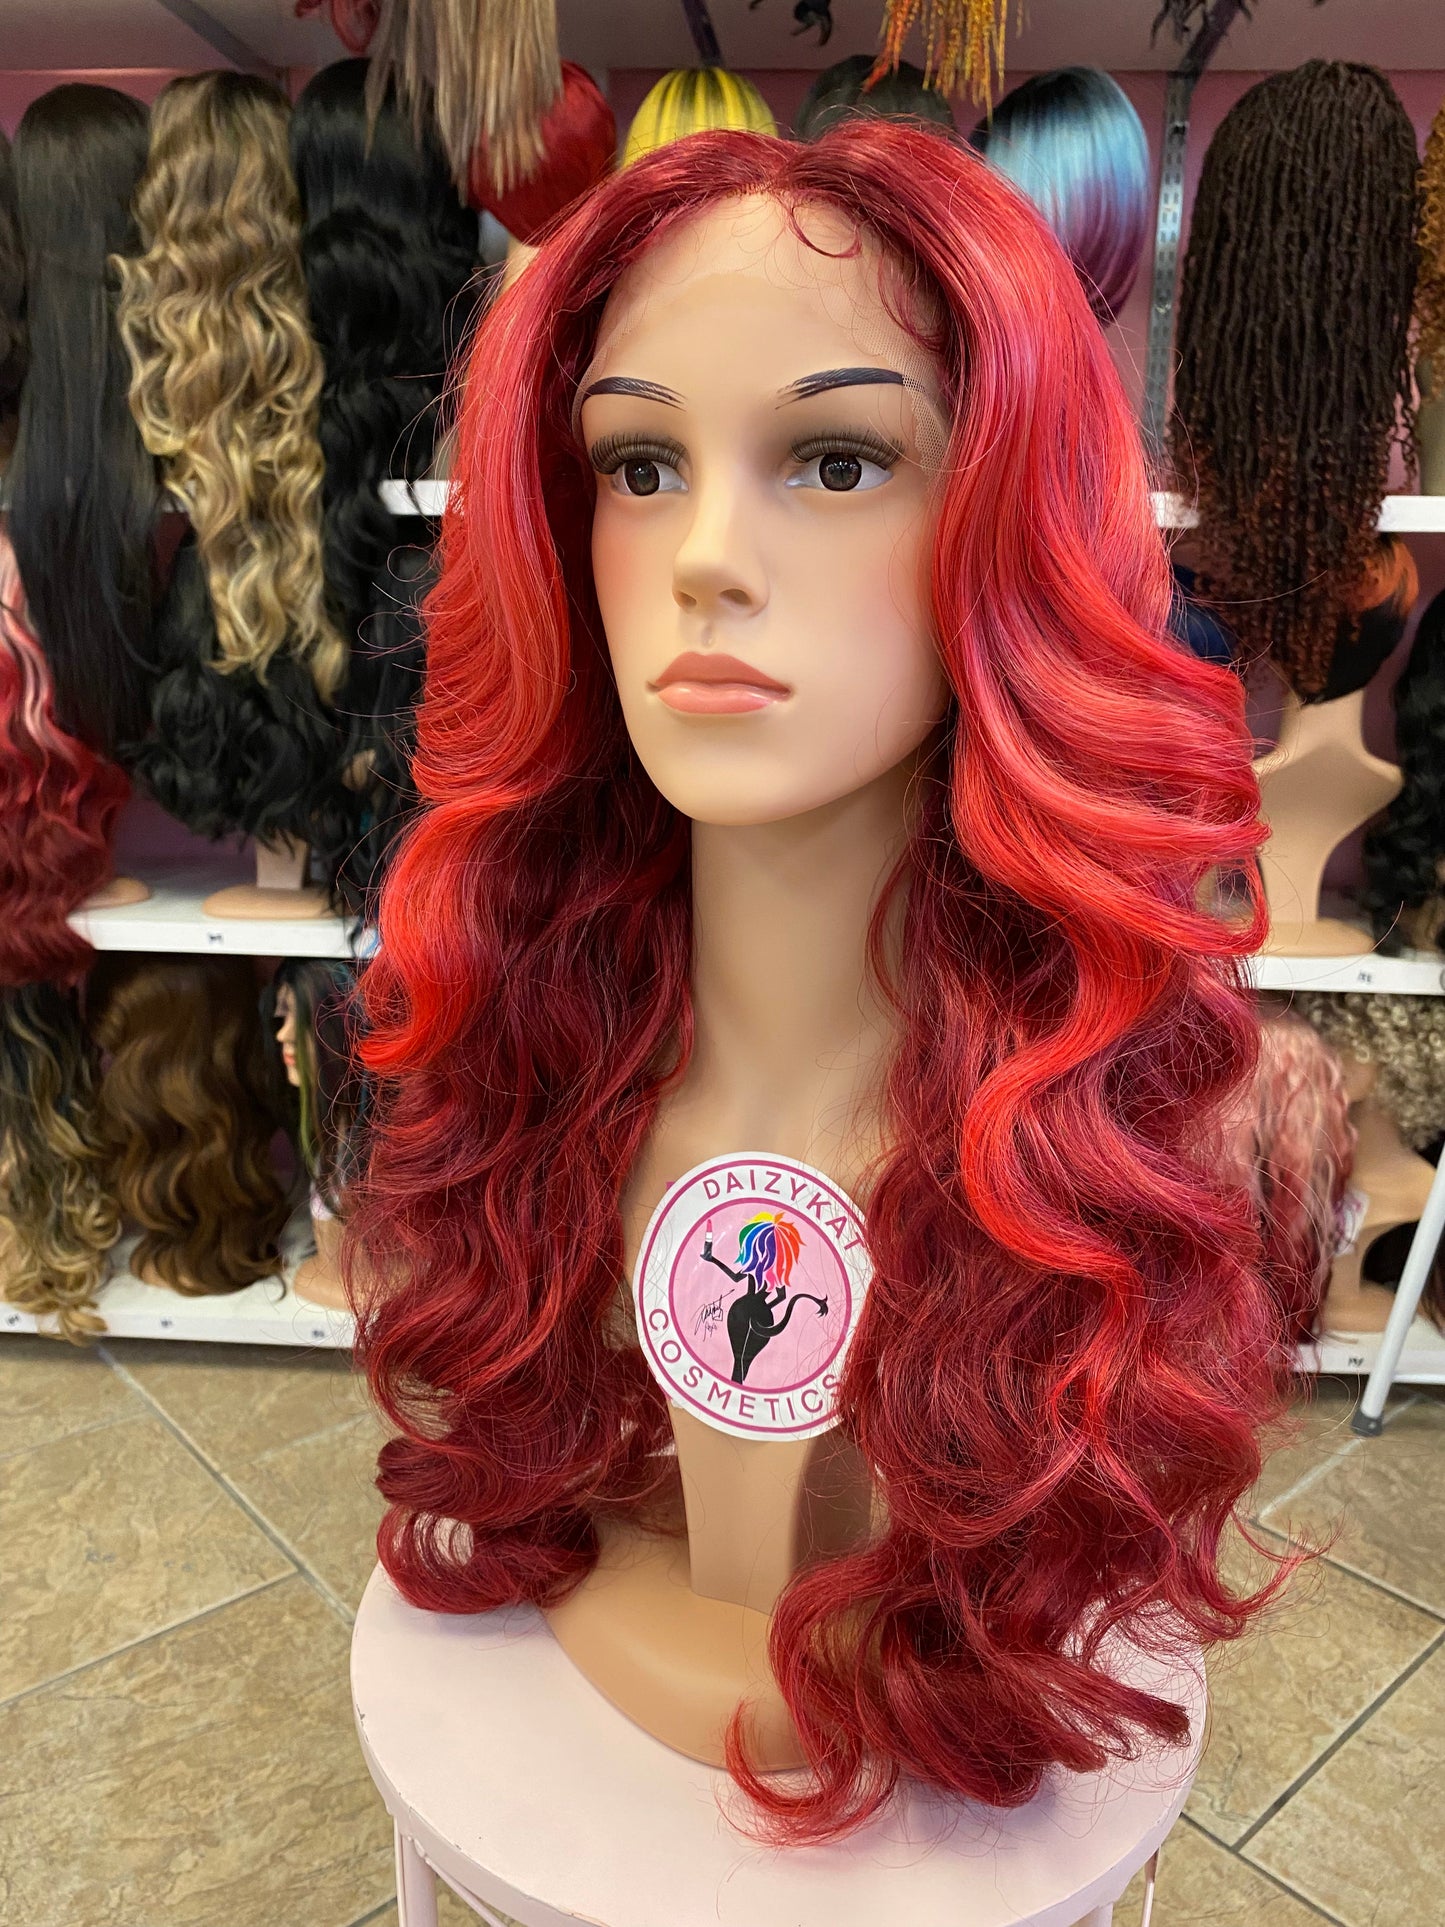 399 Sapphire - Middle Part Lace Front Wig - STARBURST - DaizyKat Cosmetics 399 Sapphire - Middle Part Lace Front Wig - STARBURST DaizyKat Cosmetics Wigs